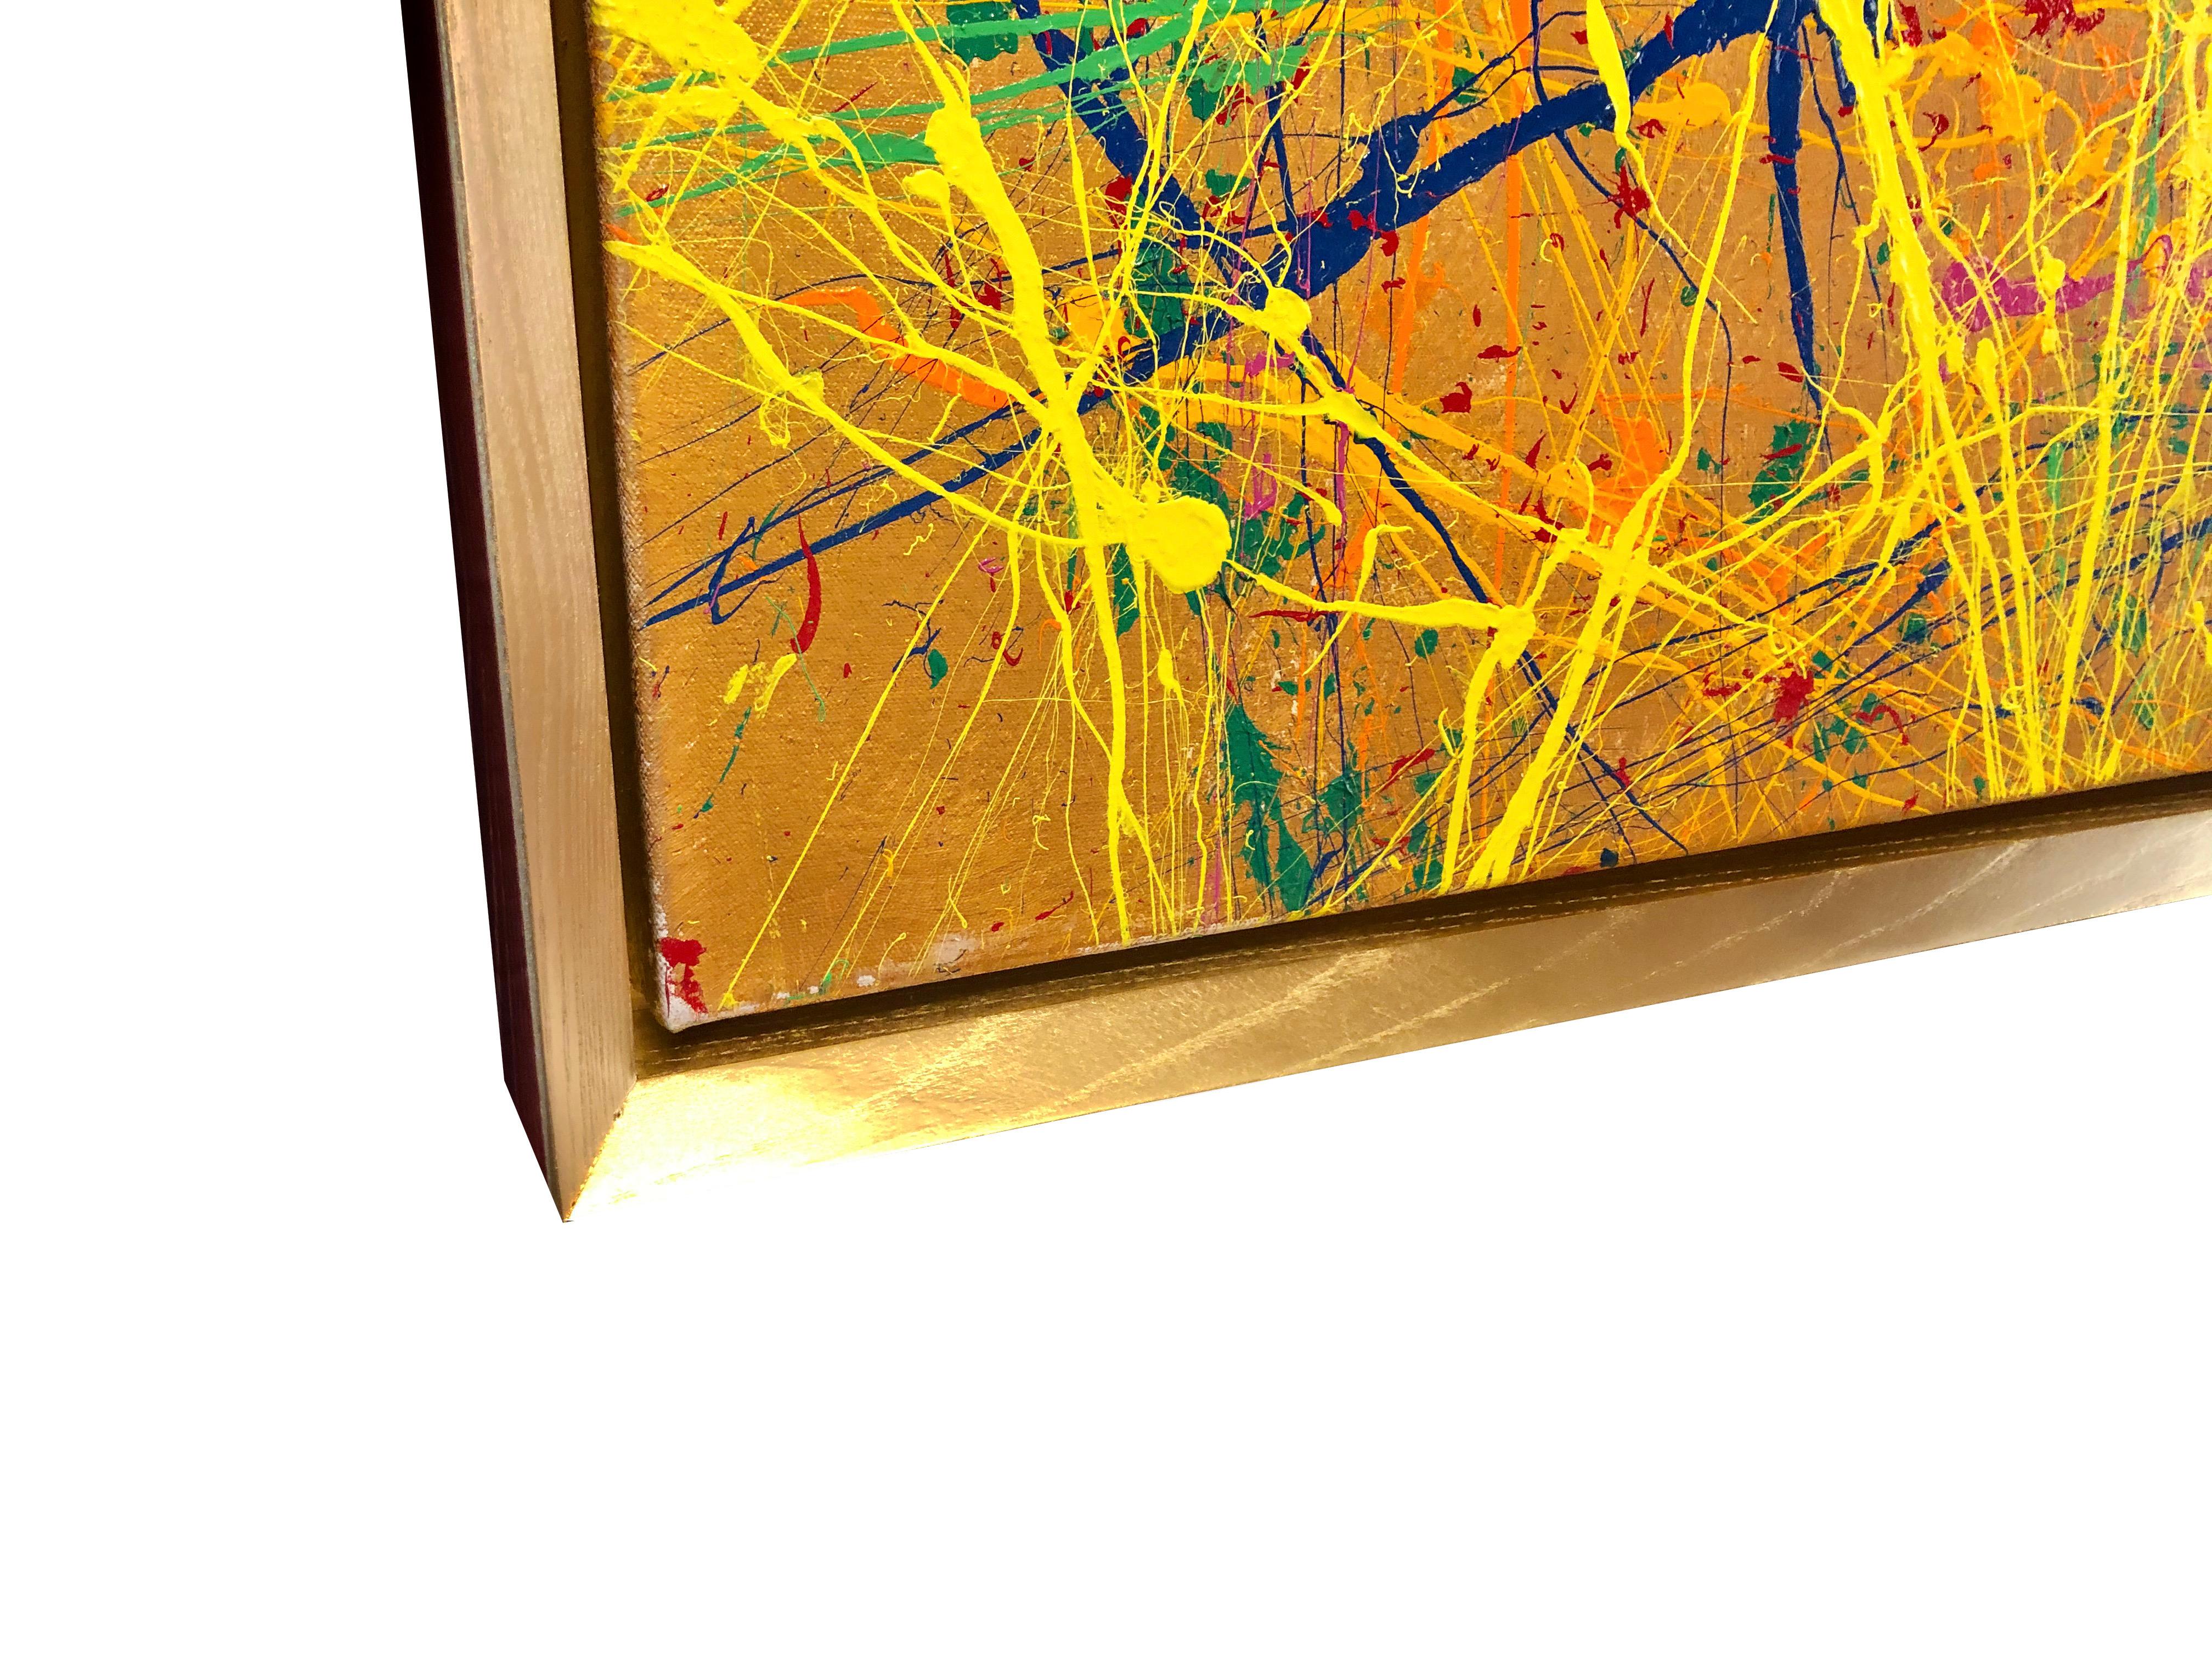 The painting is titled Electric Brainwave. Painted by Troy Smith in acrylic on canvas with a solid ash floater frame painted in metallic gold. Vivid in colour Electric Brainwave evokes energy, depth, movement and energy.

The painting comes with a